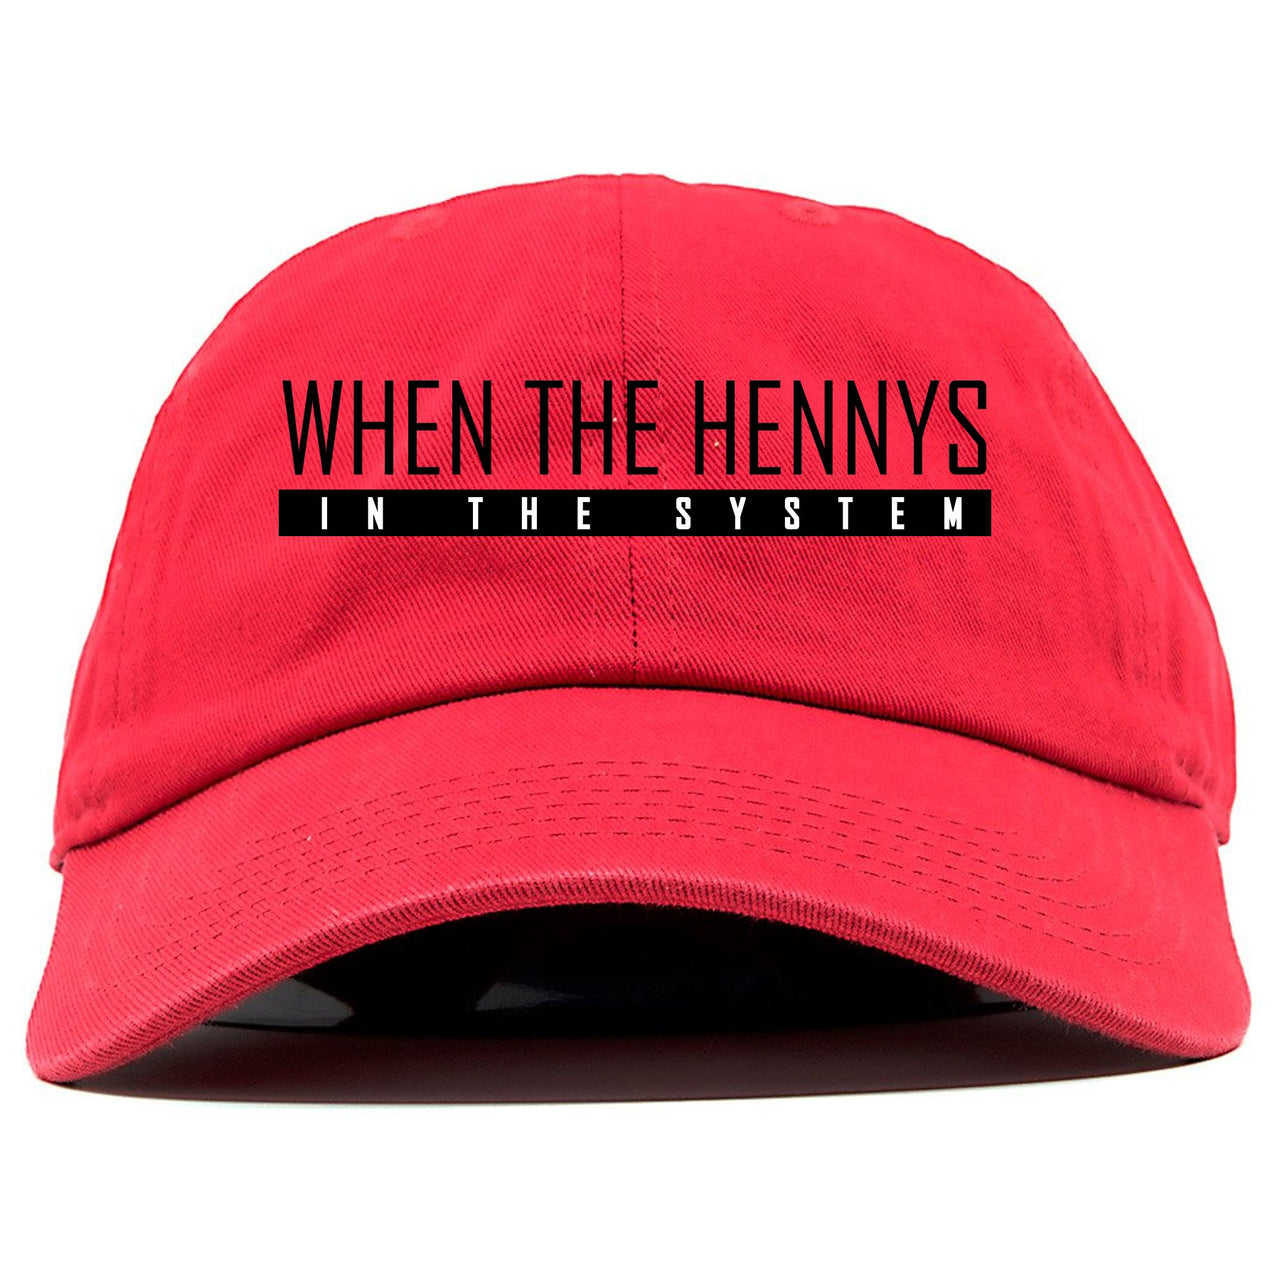 Bred 2019 4s Dad Hat | When the Hennys, Red